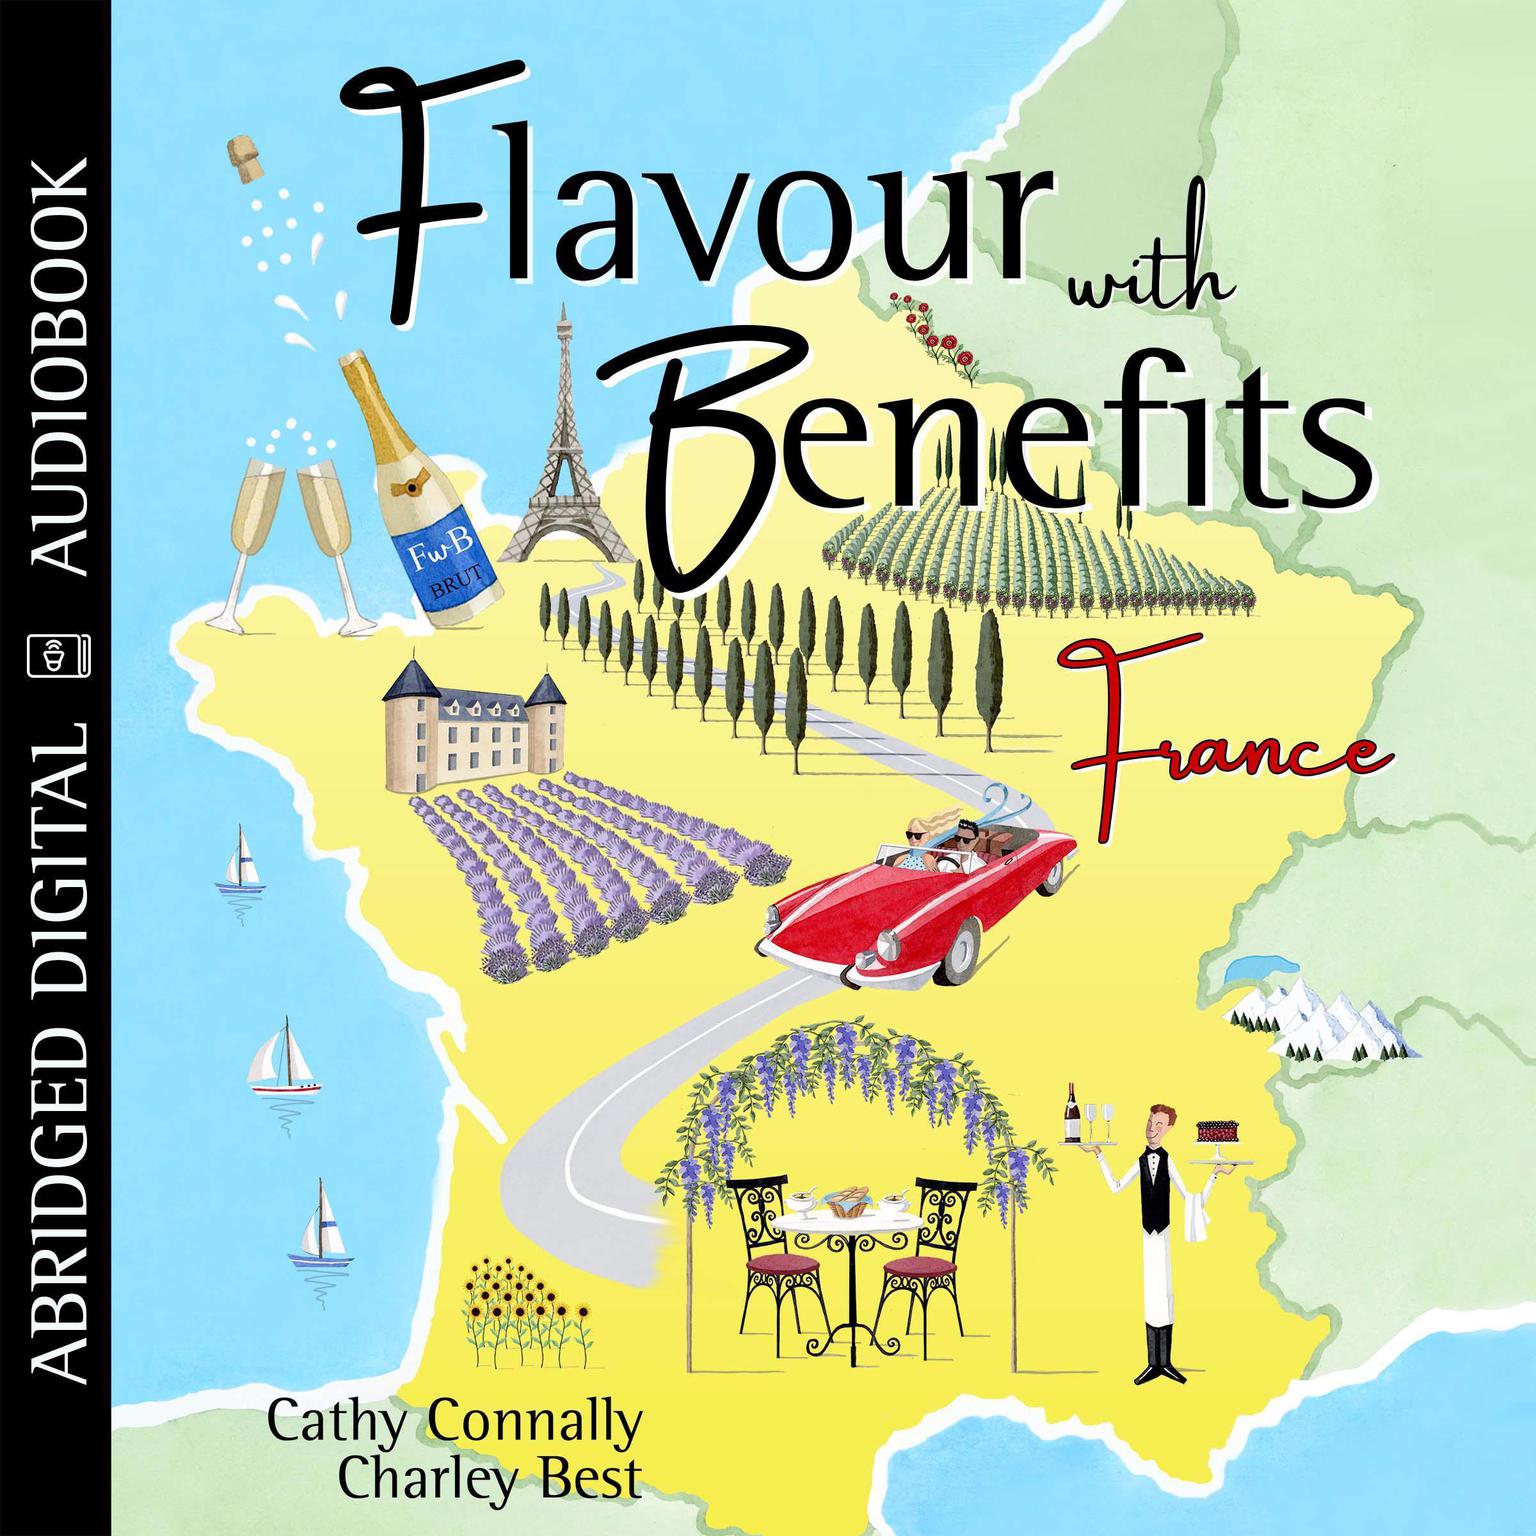 Flavour with Benefits: France (Abridged) Audiobook, by Cathy Connally  Charley Best